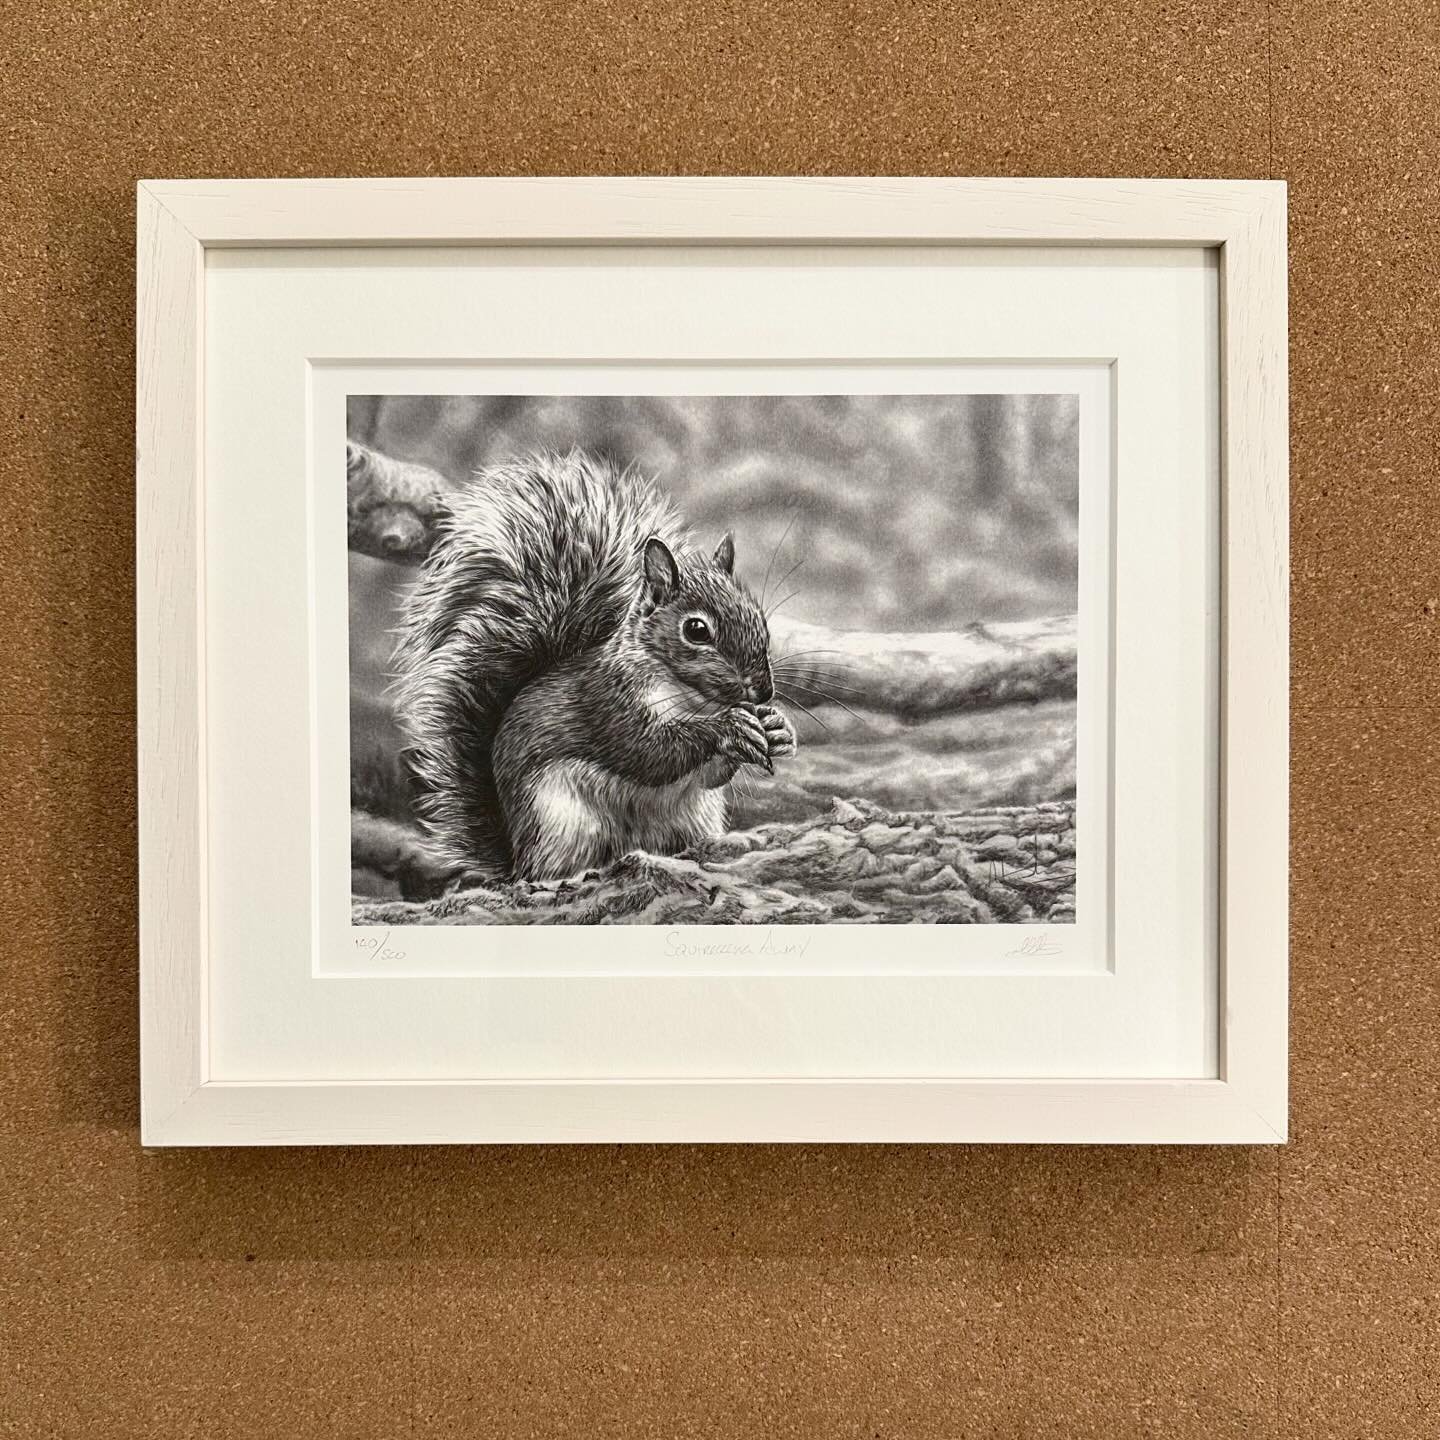 And a slightly different off-white moulding for this squirrel print